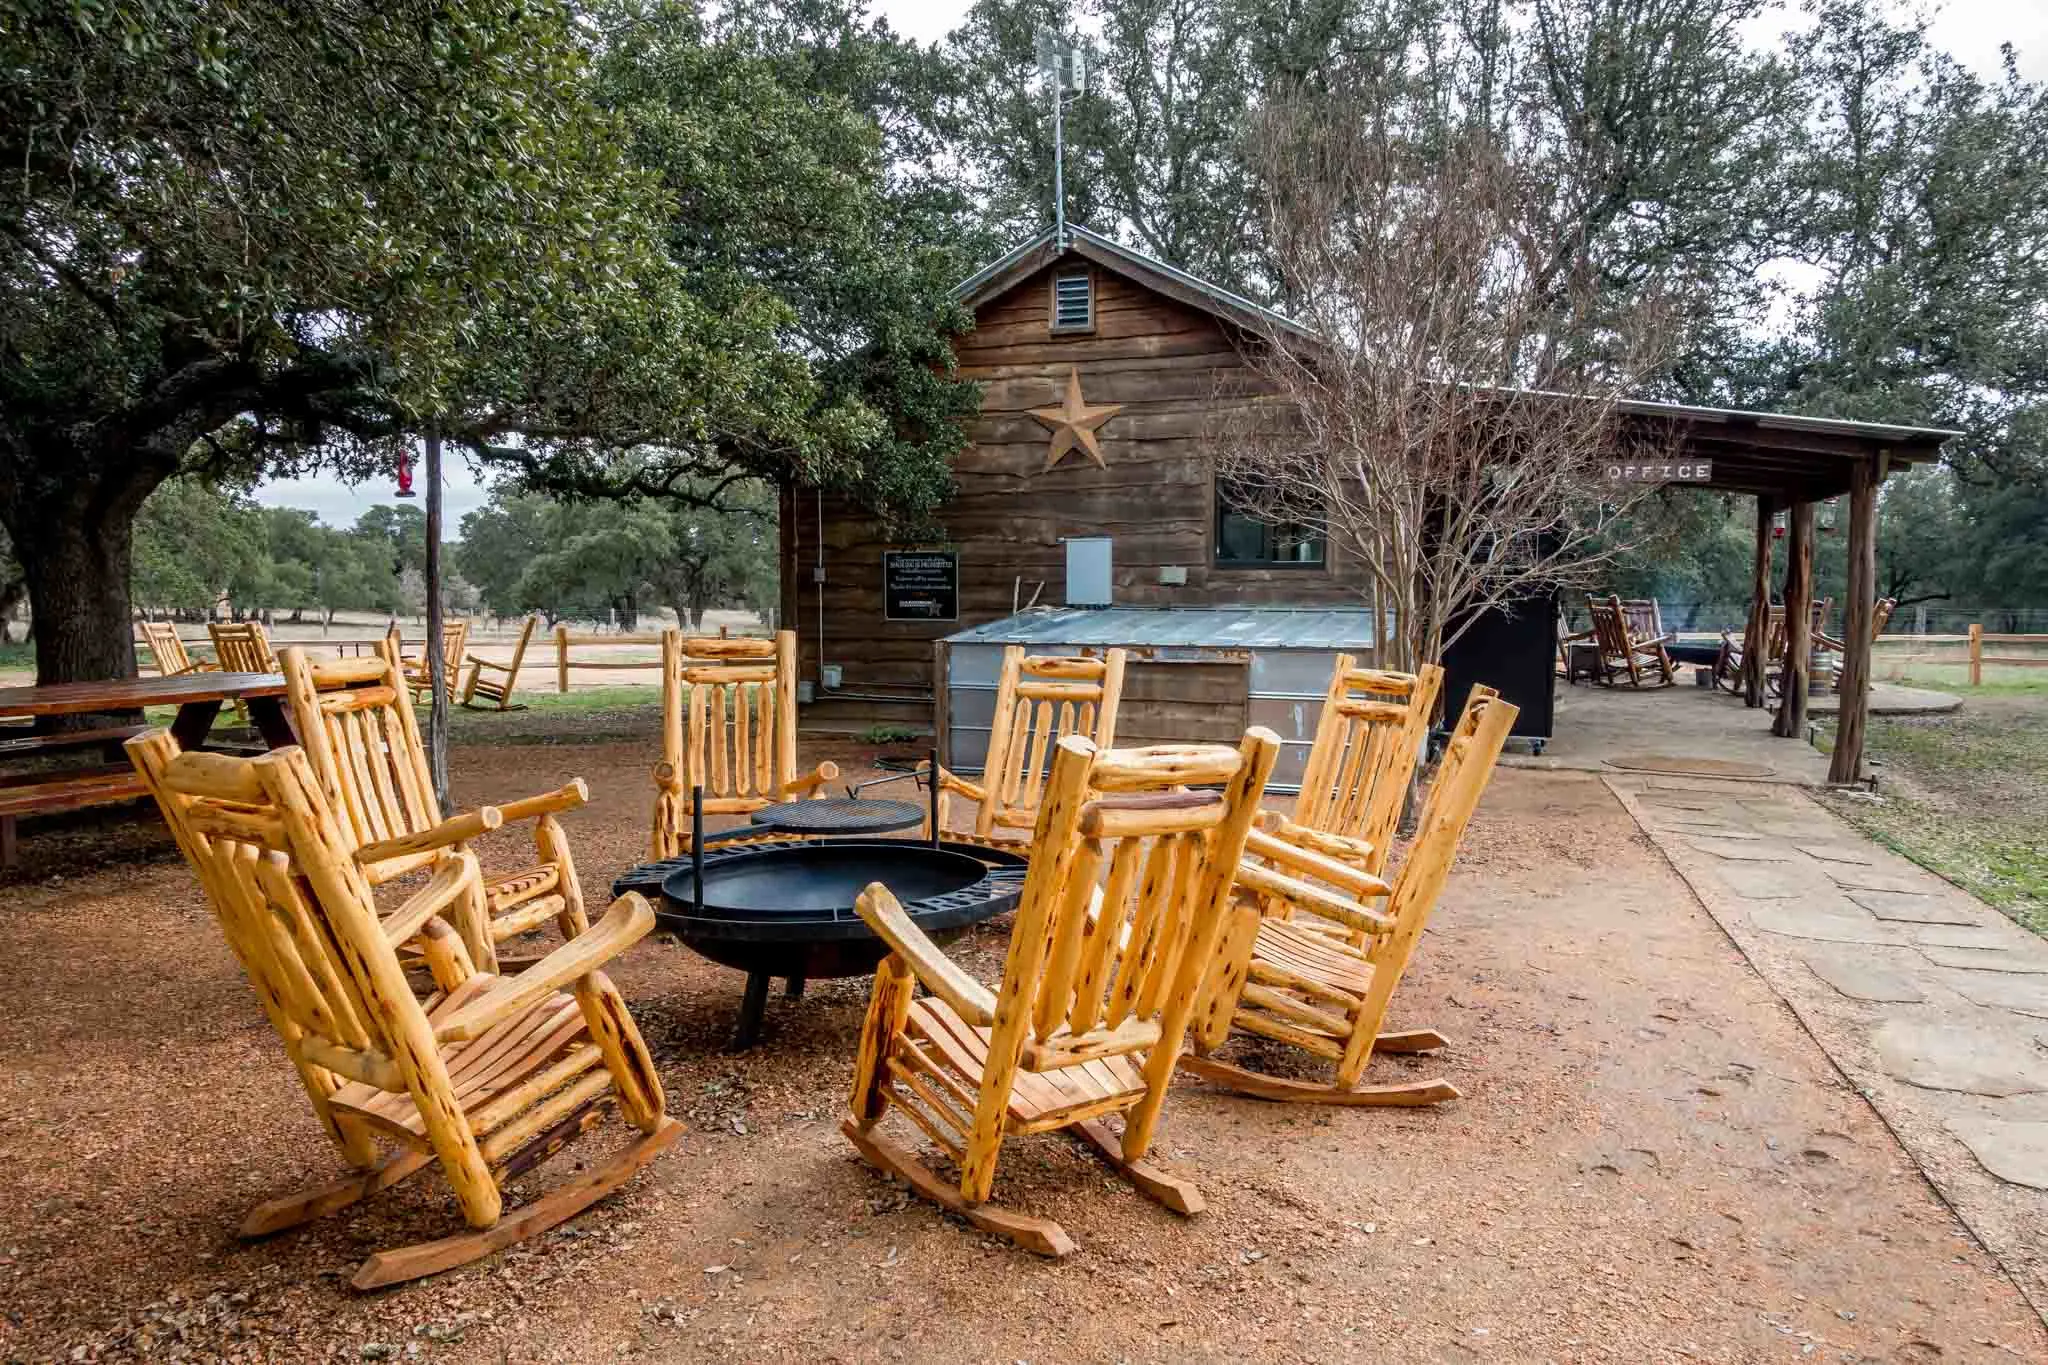 Rocking chairs around fire pit outside a wooden building.